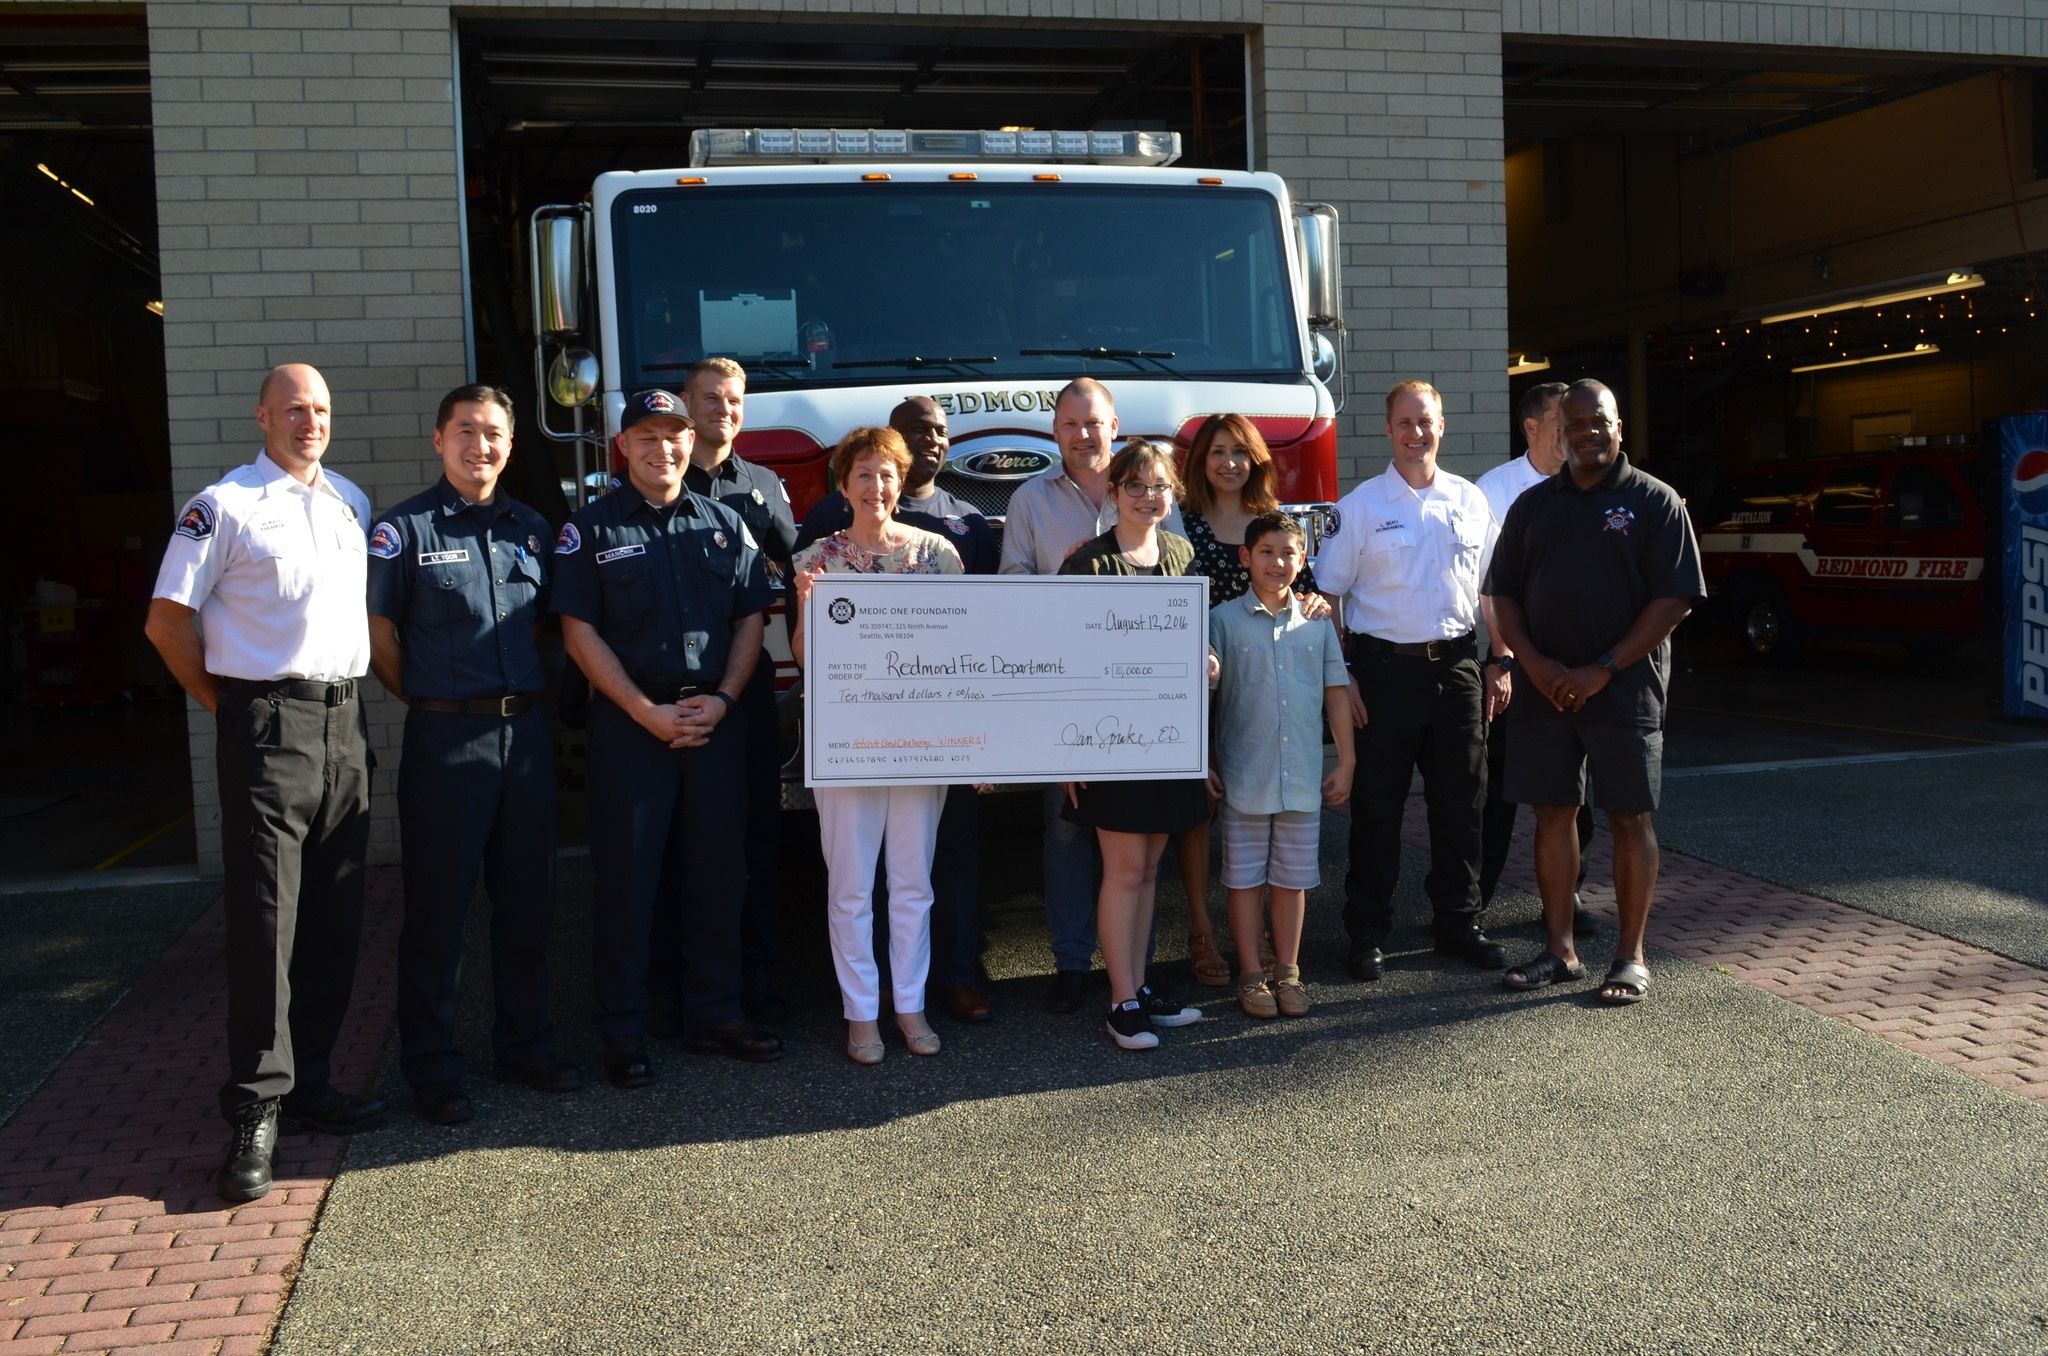 The Redmond Fire Department recently won the Medic One Foundation’s Hot Shot Crew Challenge.